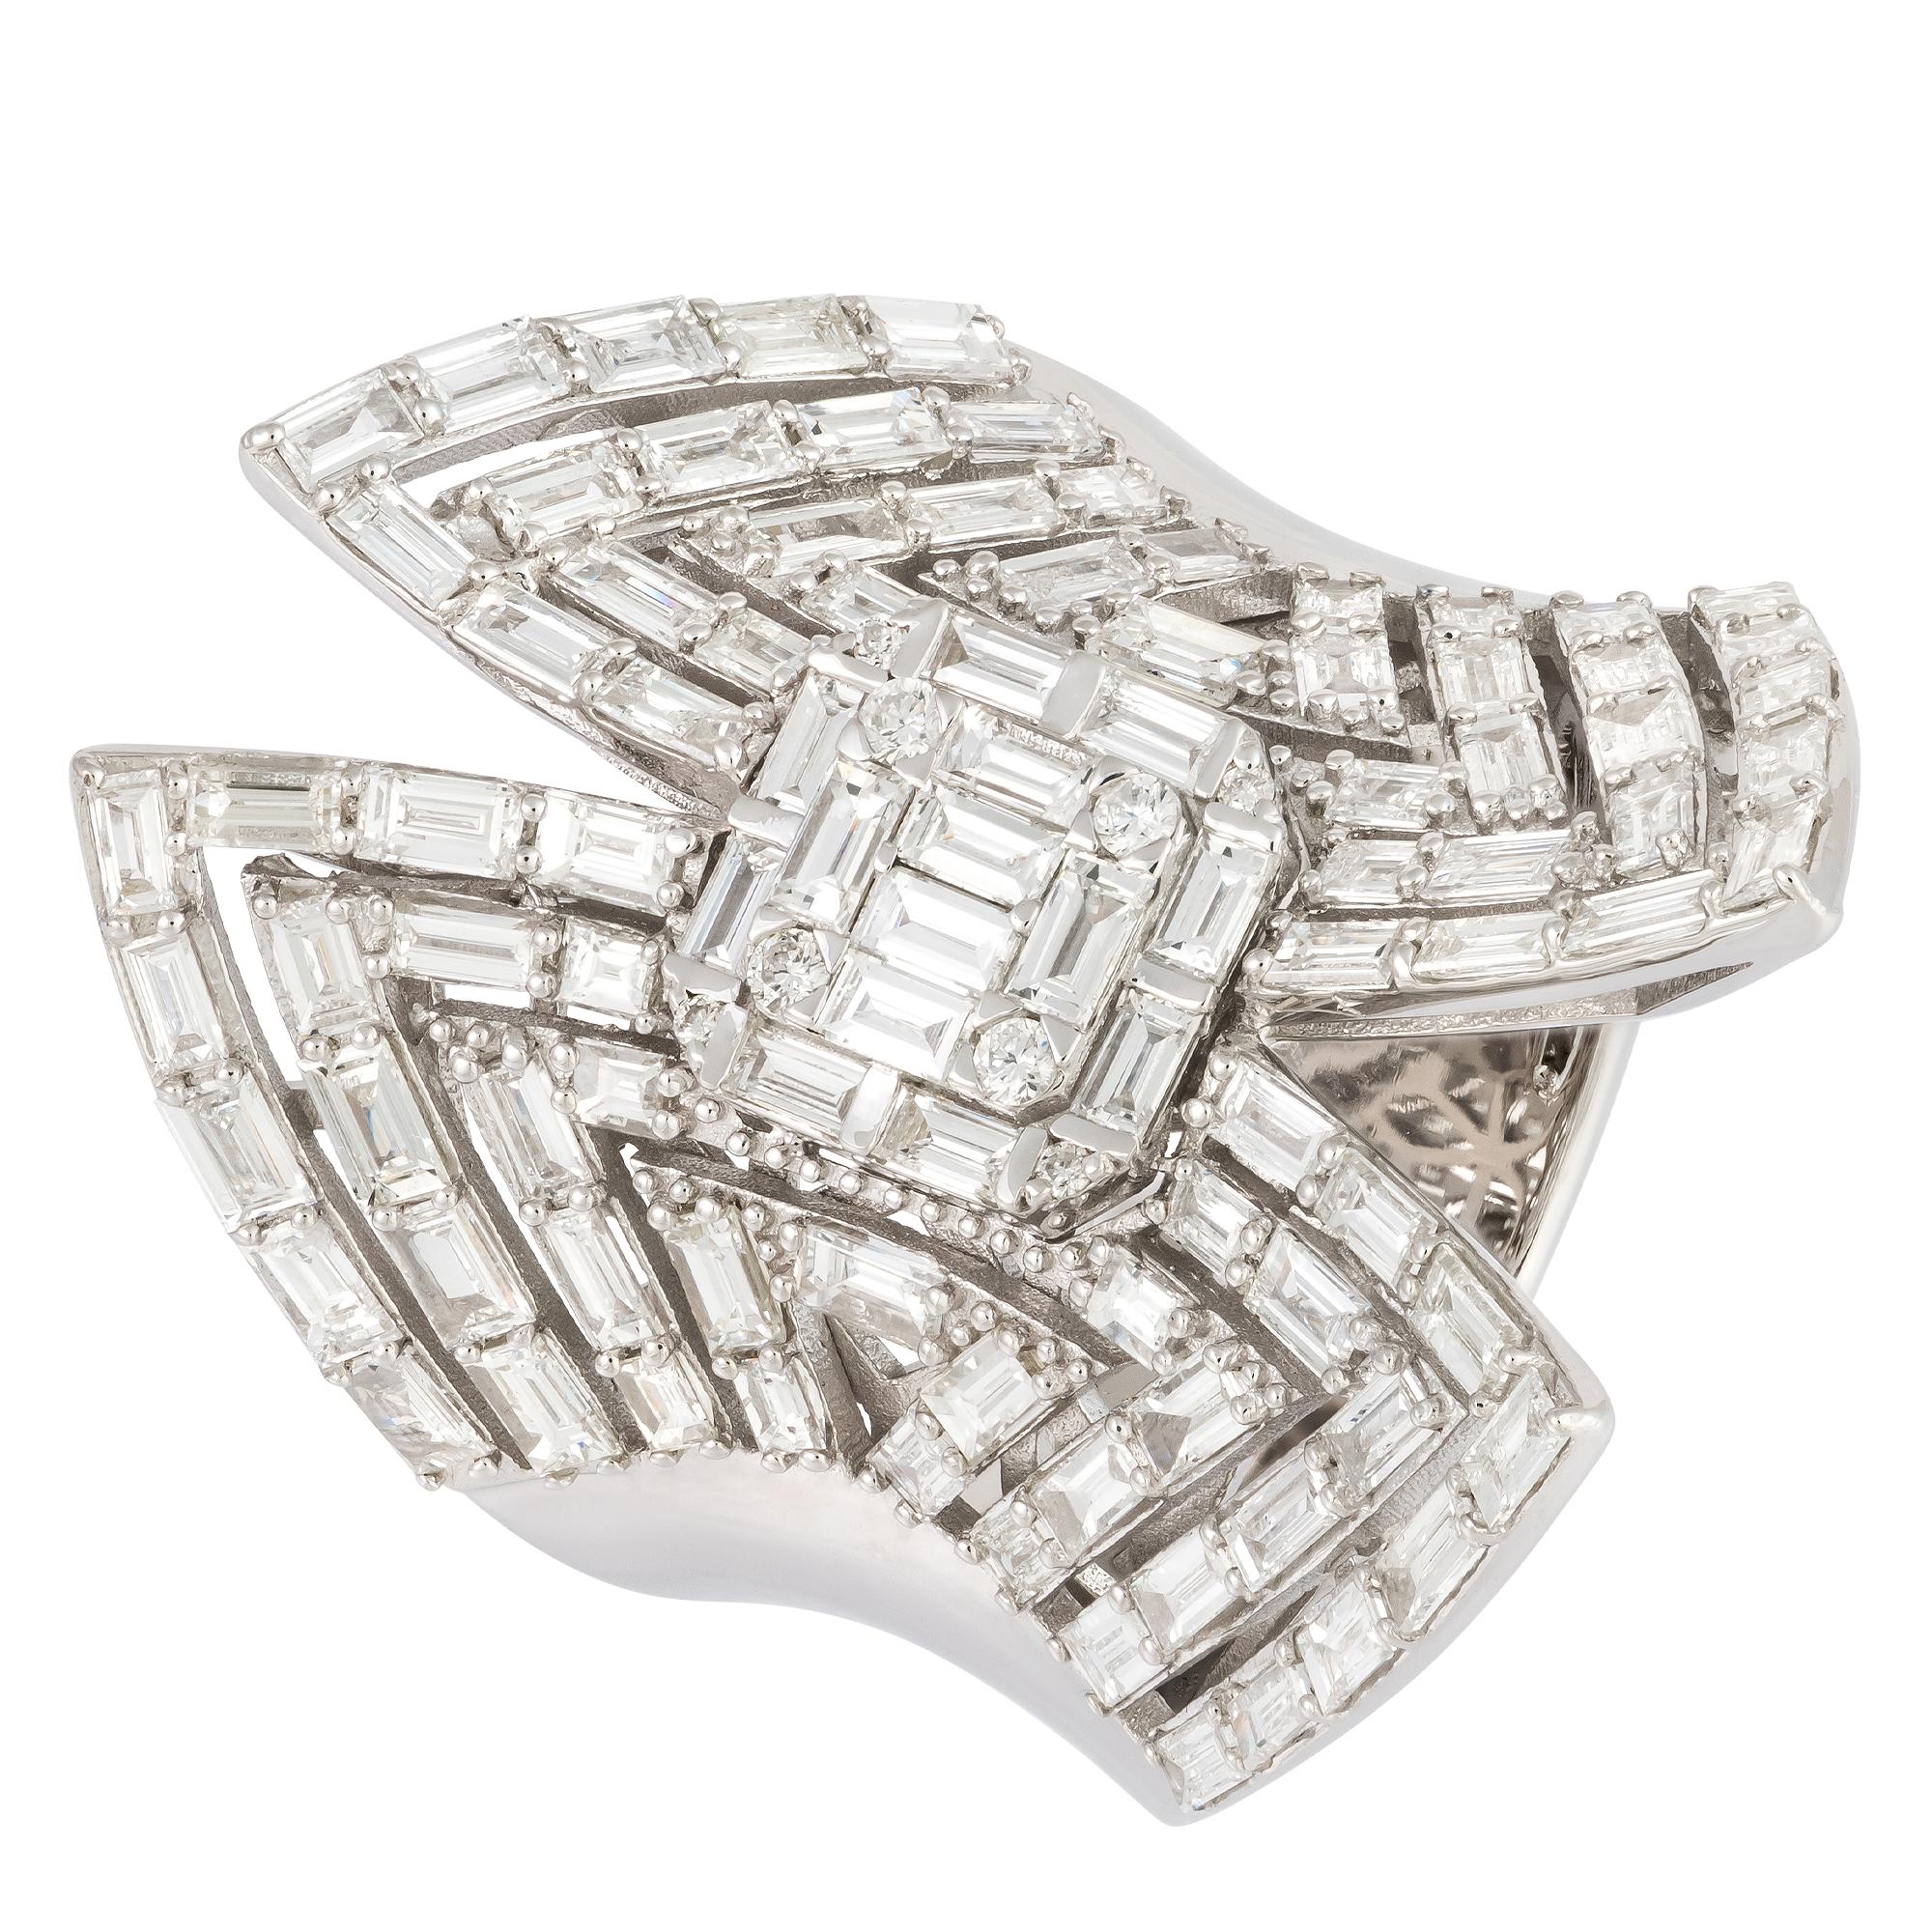 For Sale:  Statement  White 18K Gold White Diamond Ring For Her 3